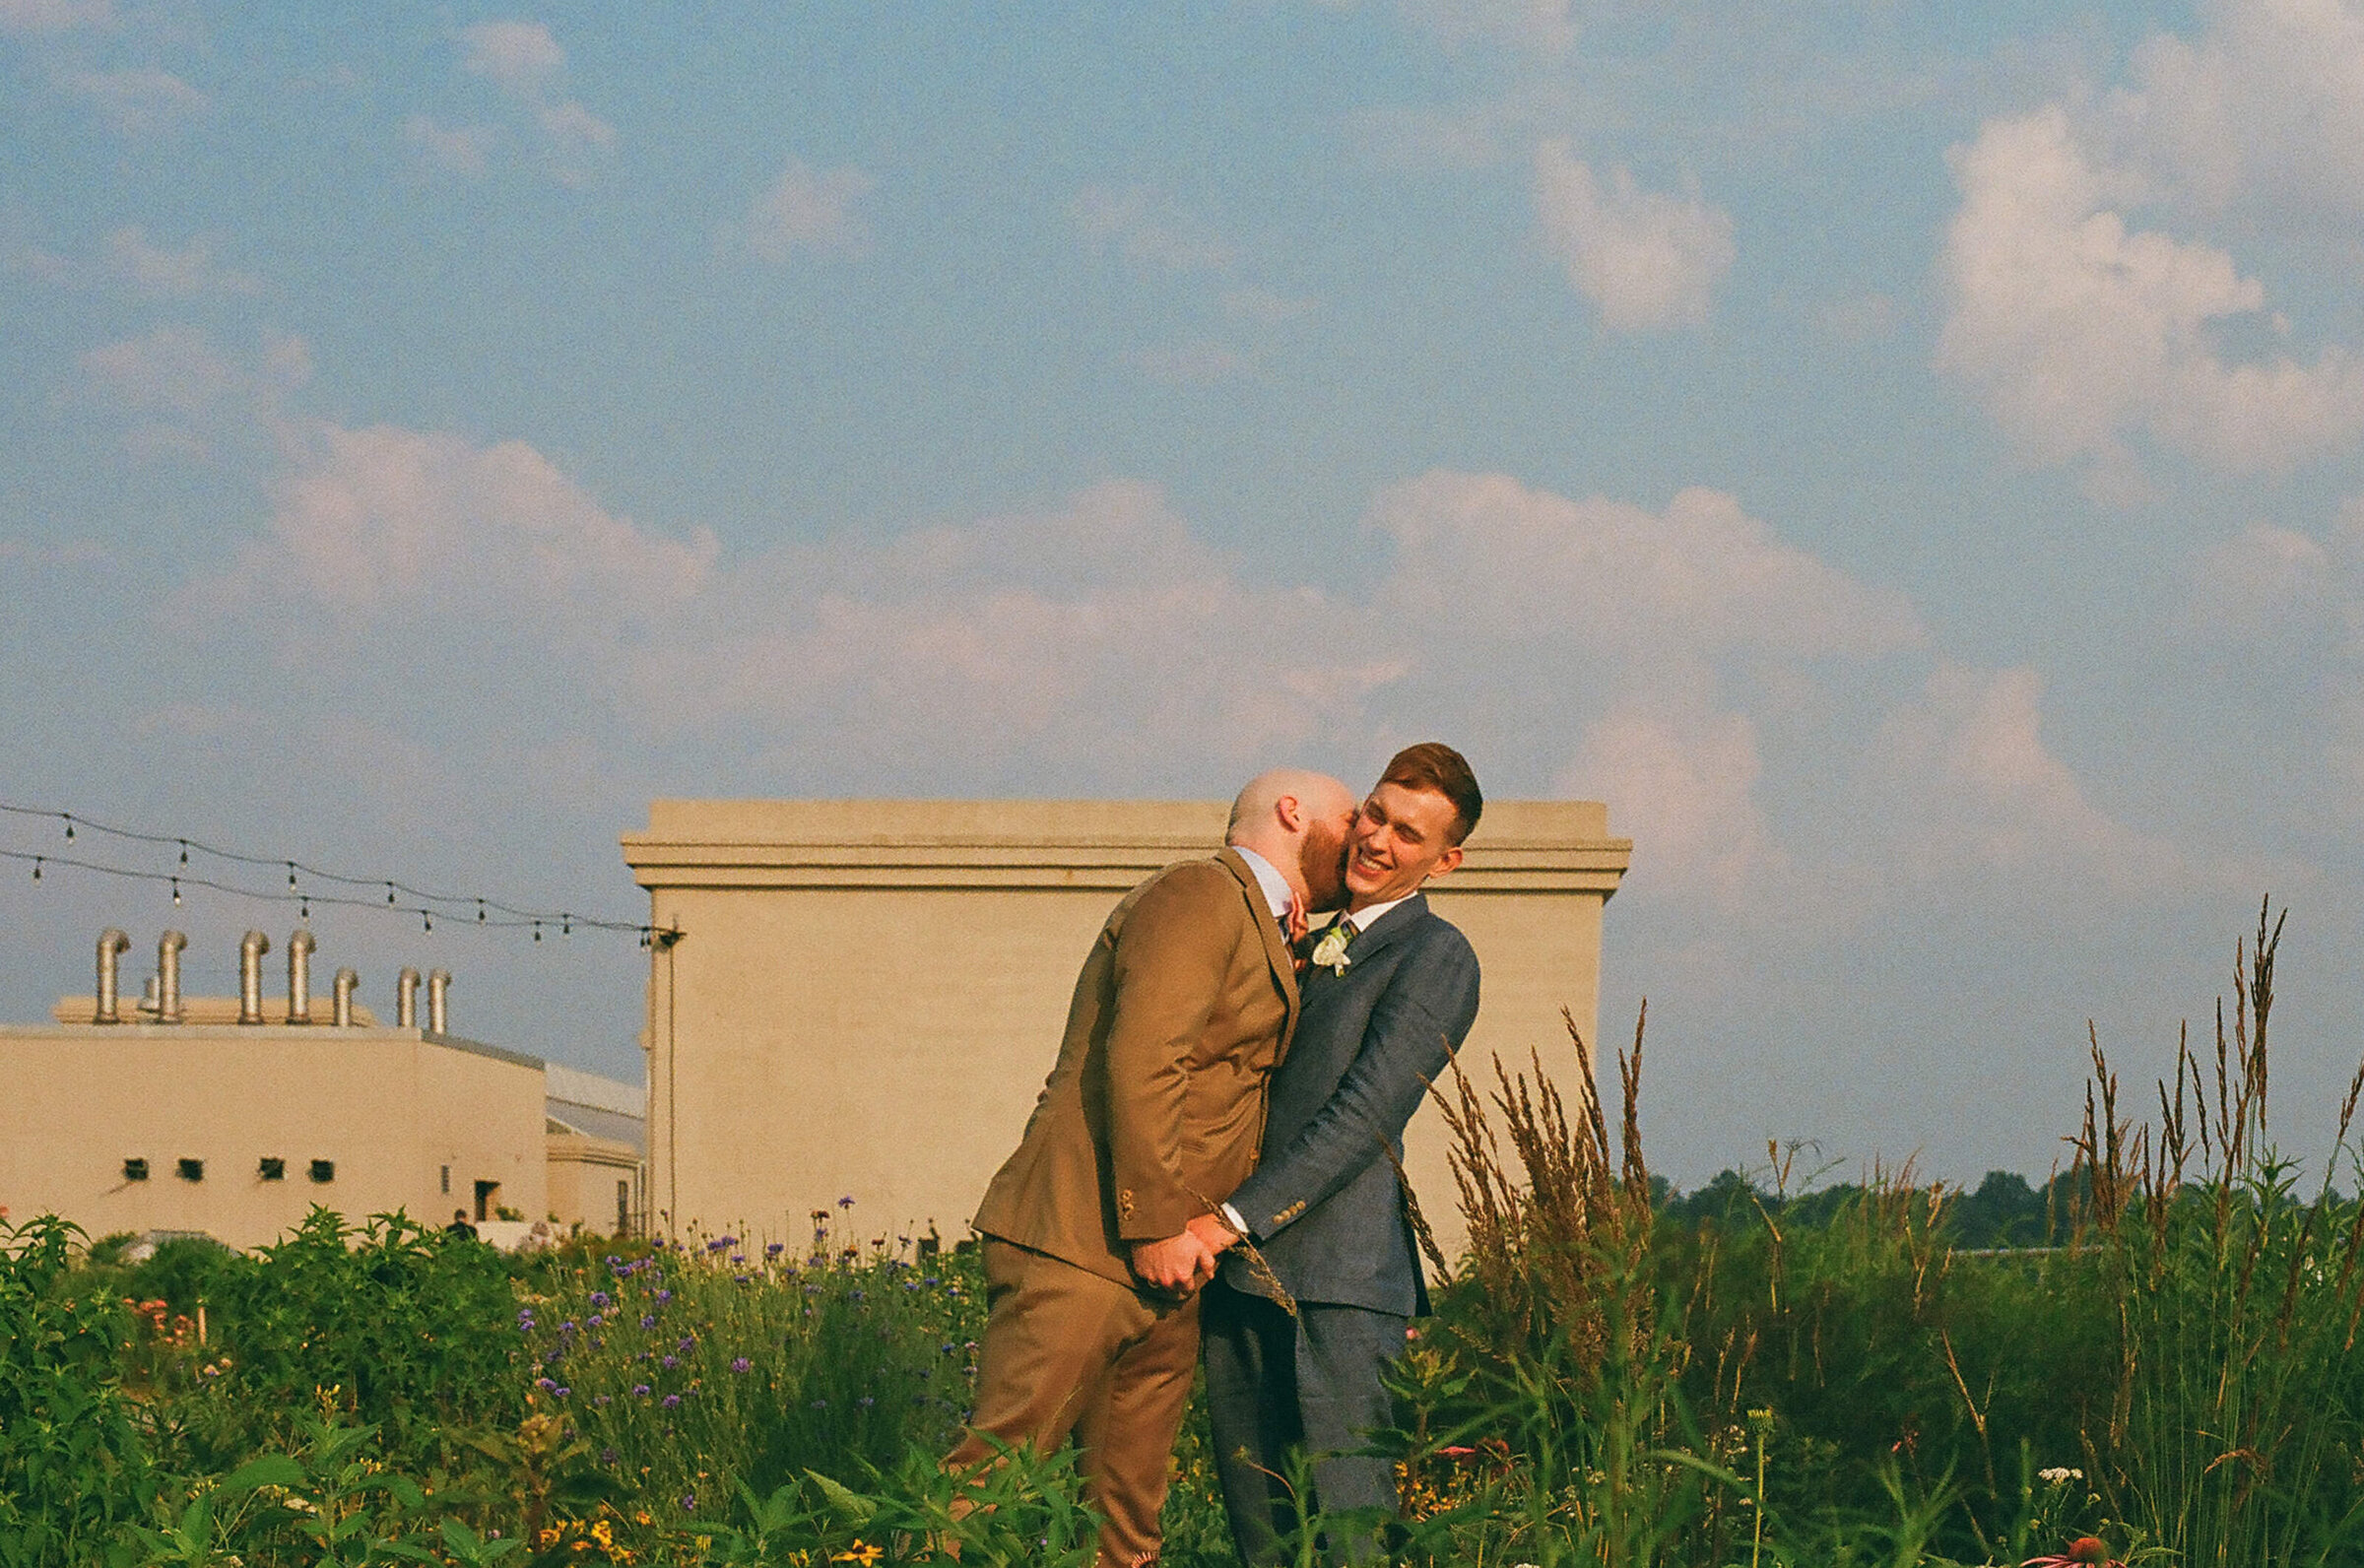 A person leaning in to kiss their partner's cheek in a small field.